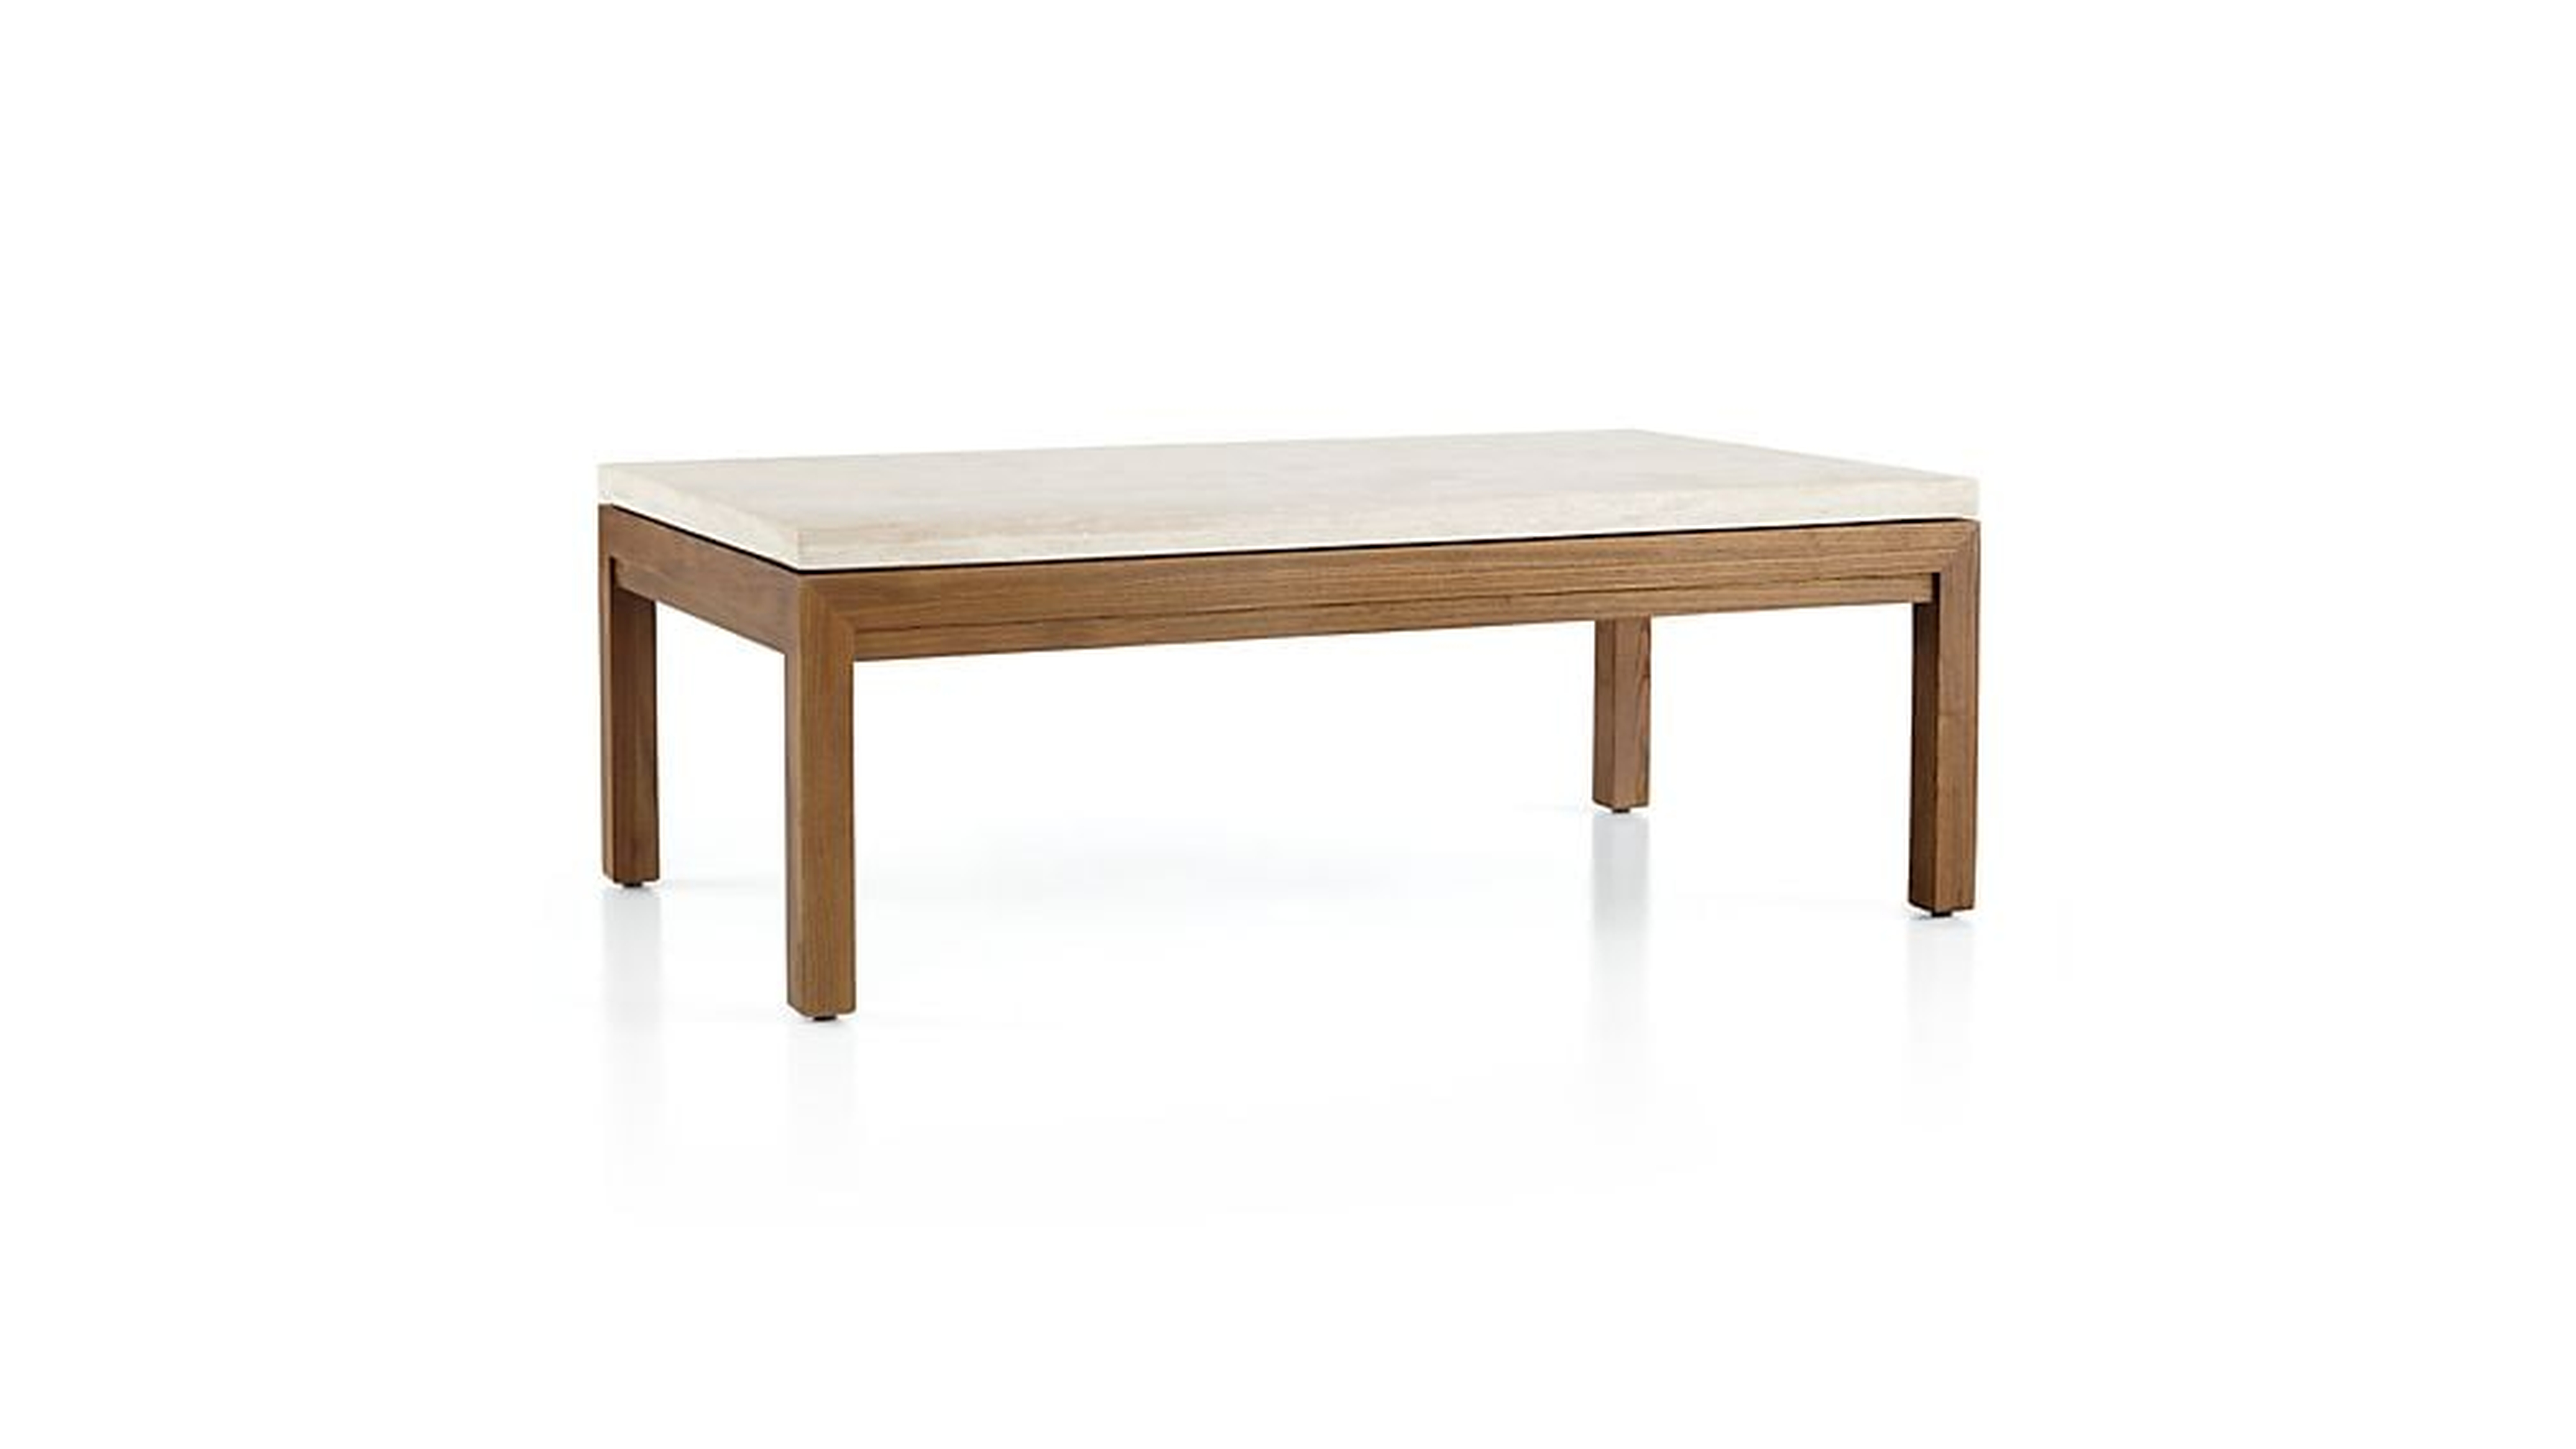 Parsons Travertine Top/ Elm Base 48x28 Small Rectangular Coffee Table - Crate and Barrel